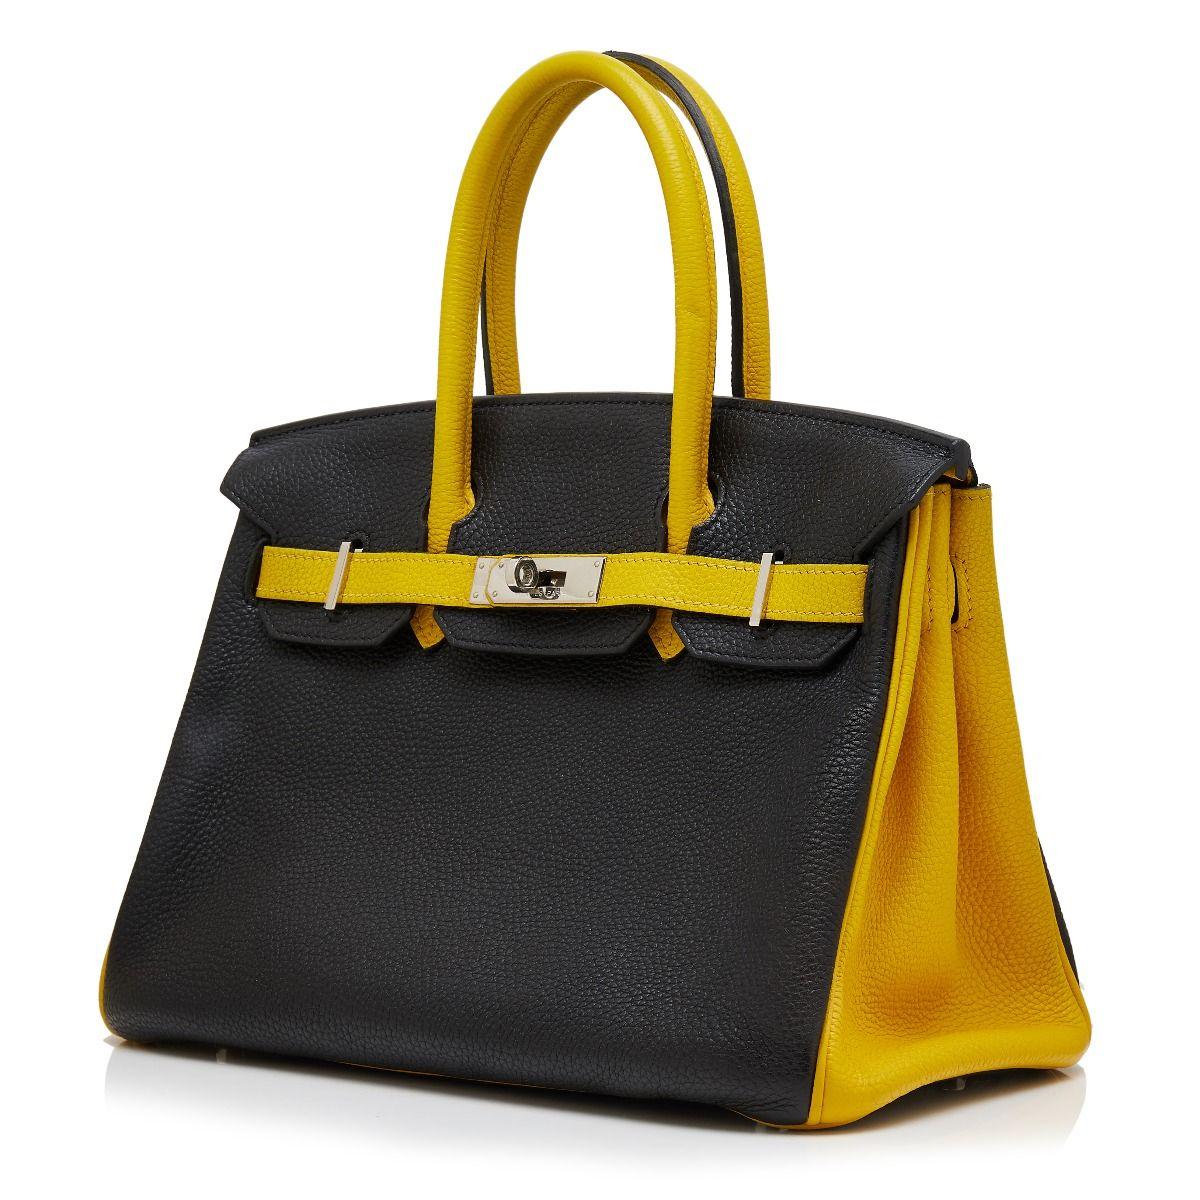 Adding a twist to the traditional Hermès Birkin, this bi-colour bag was specially made to order and showcases a bold black togo leather exterior, which is offset by contrasting bright yellow top-handles, piping and belt arms and accented by